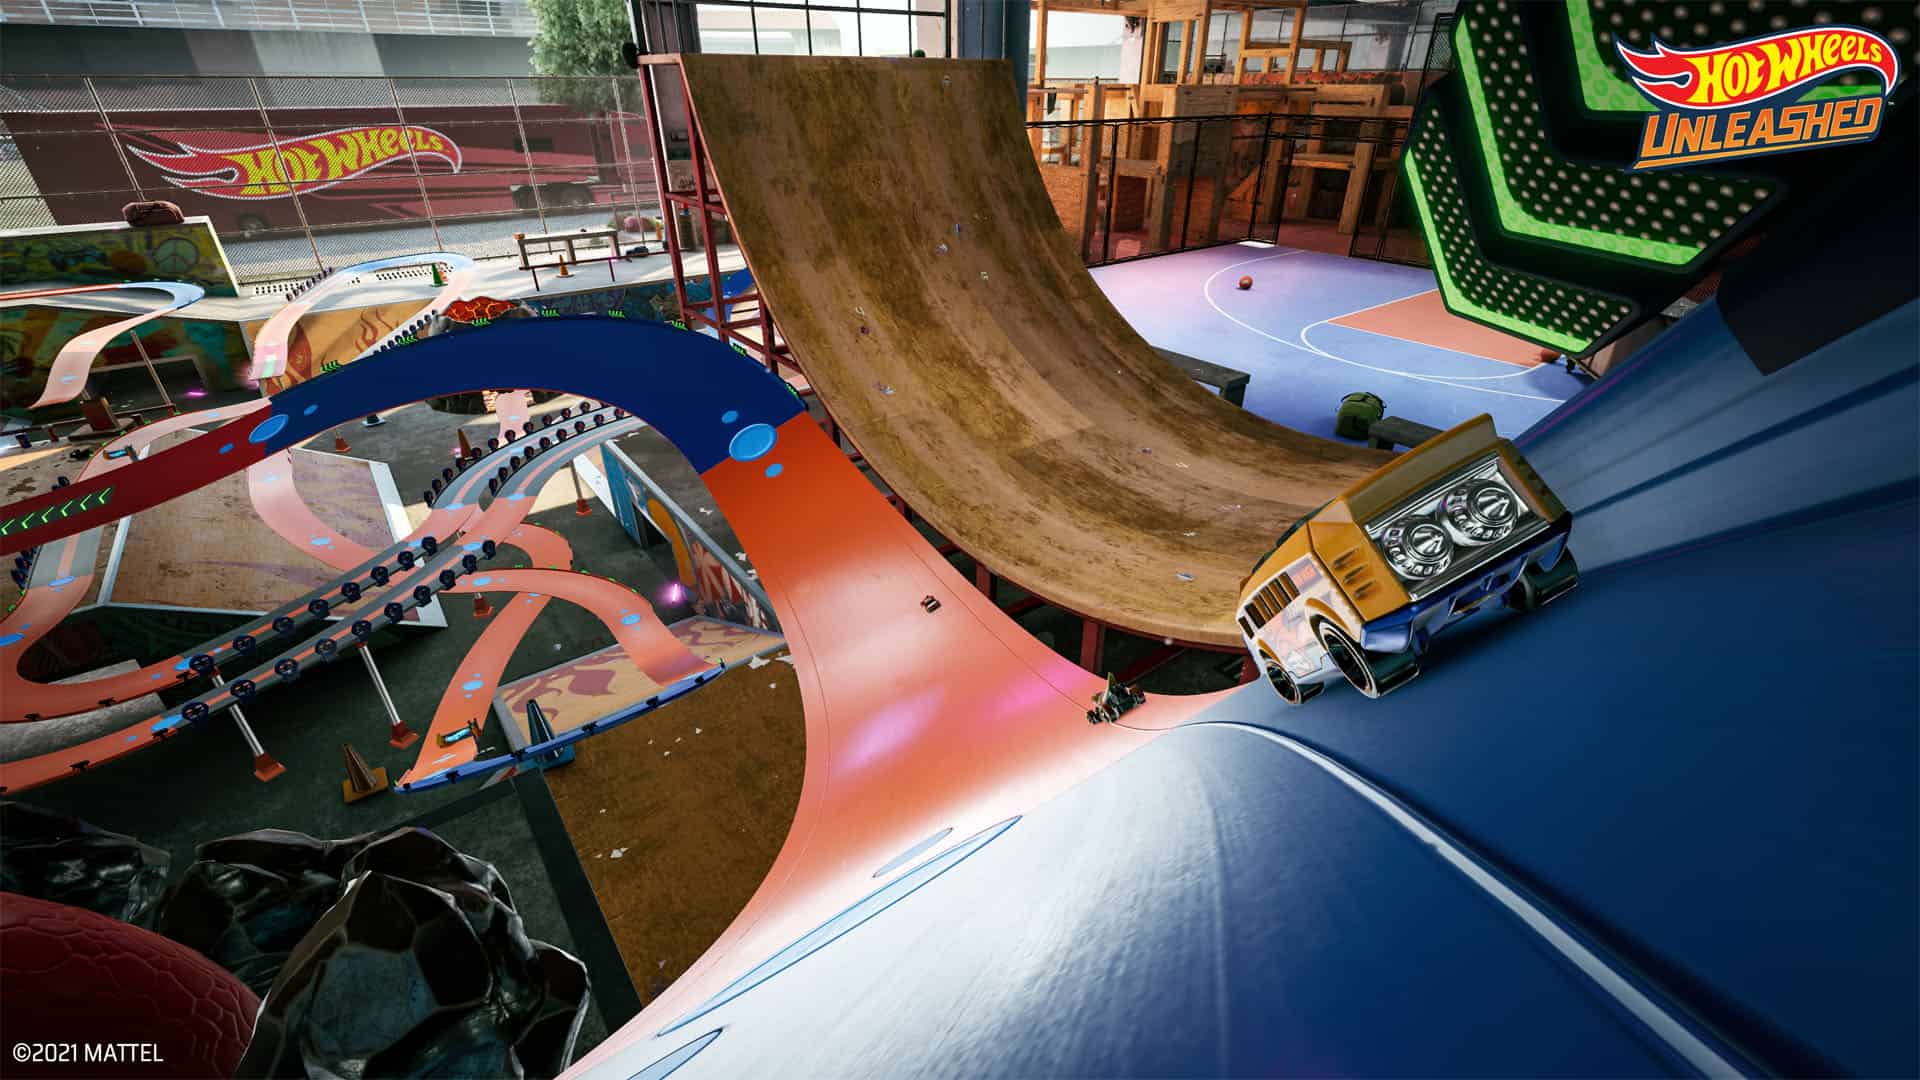 Hot Wheels Unleashed heads to the Skatepark in its latest trailer